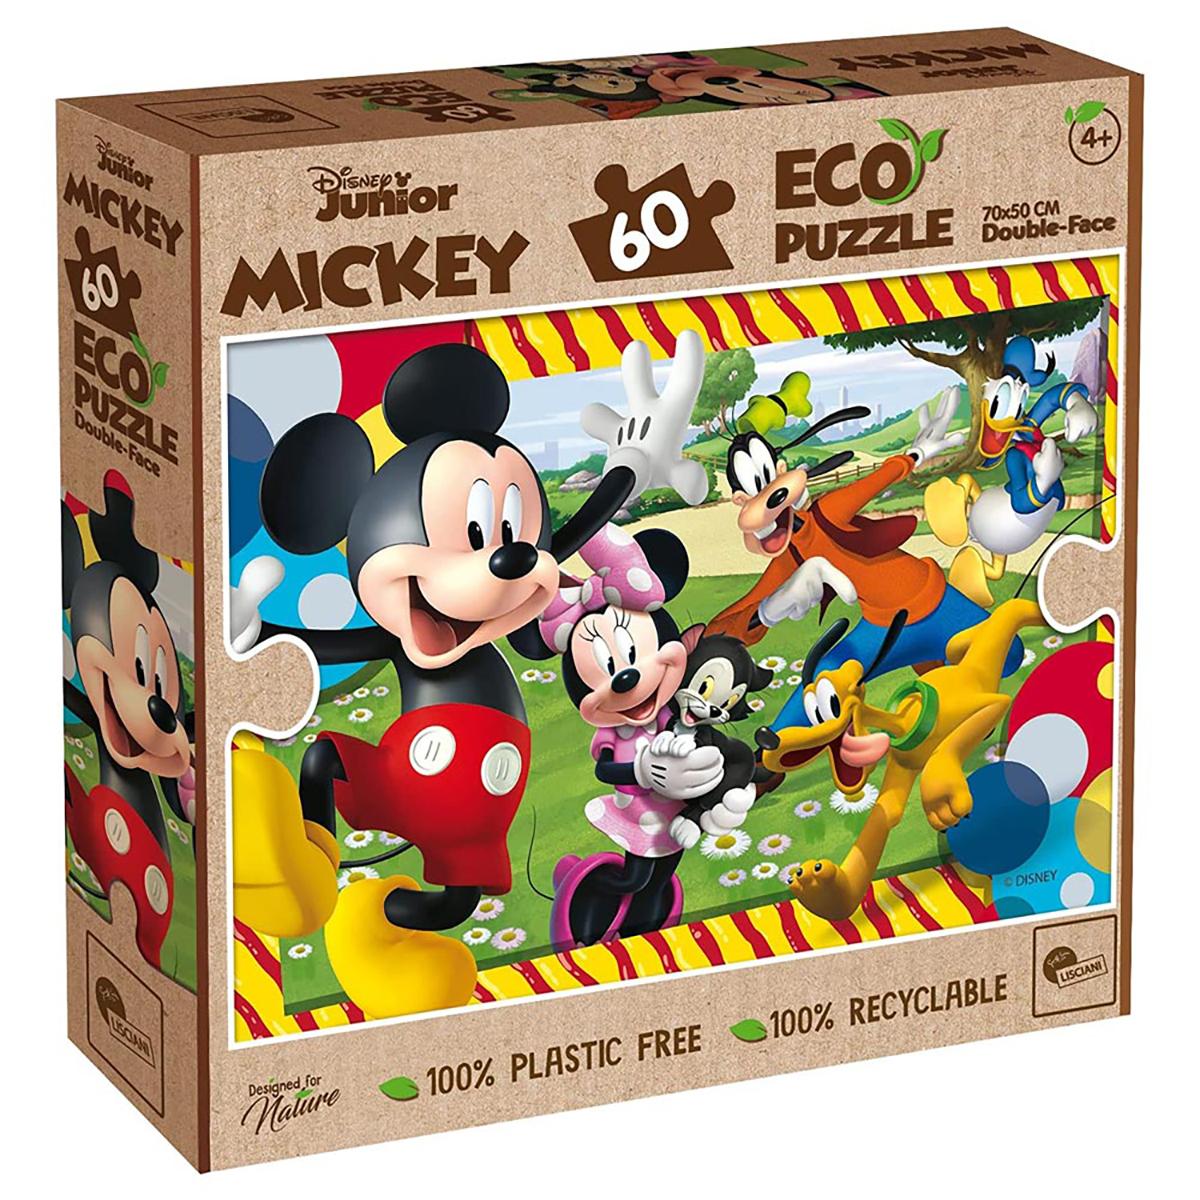 Micky Lisciani Boden von MICKEY Maus 60 MOUSE Puzzle ECO-Ausmal-Puzzle Teile,